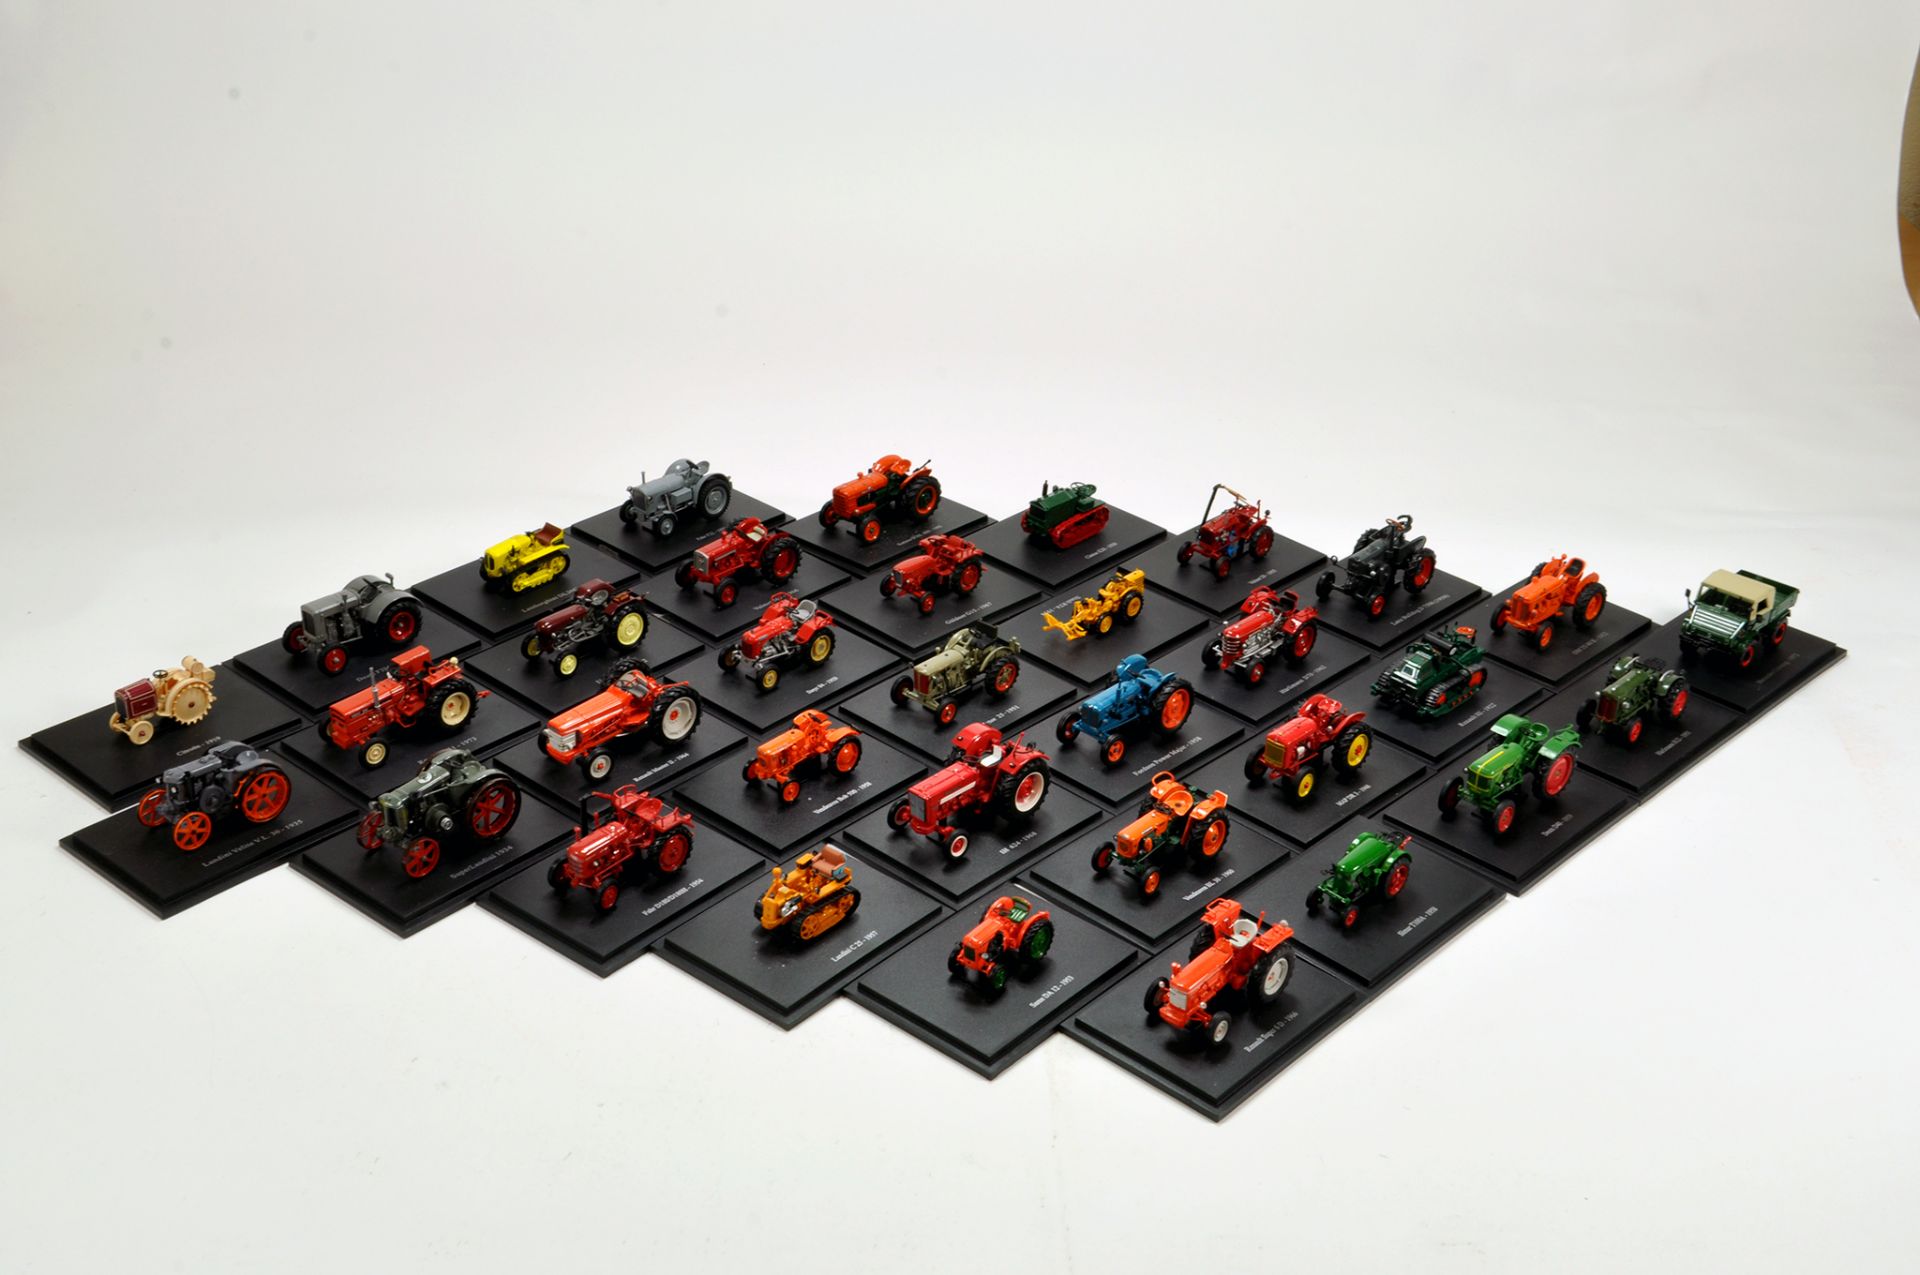 Universal Hobbies 1/43 diecast issues comprising tractor and world of farming collection.